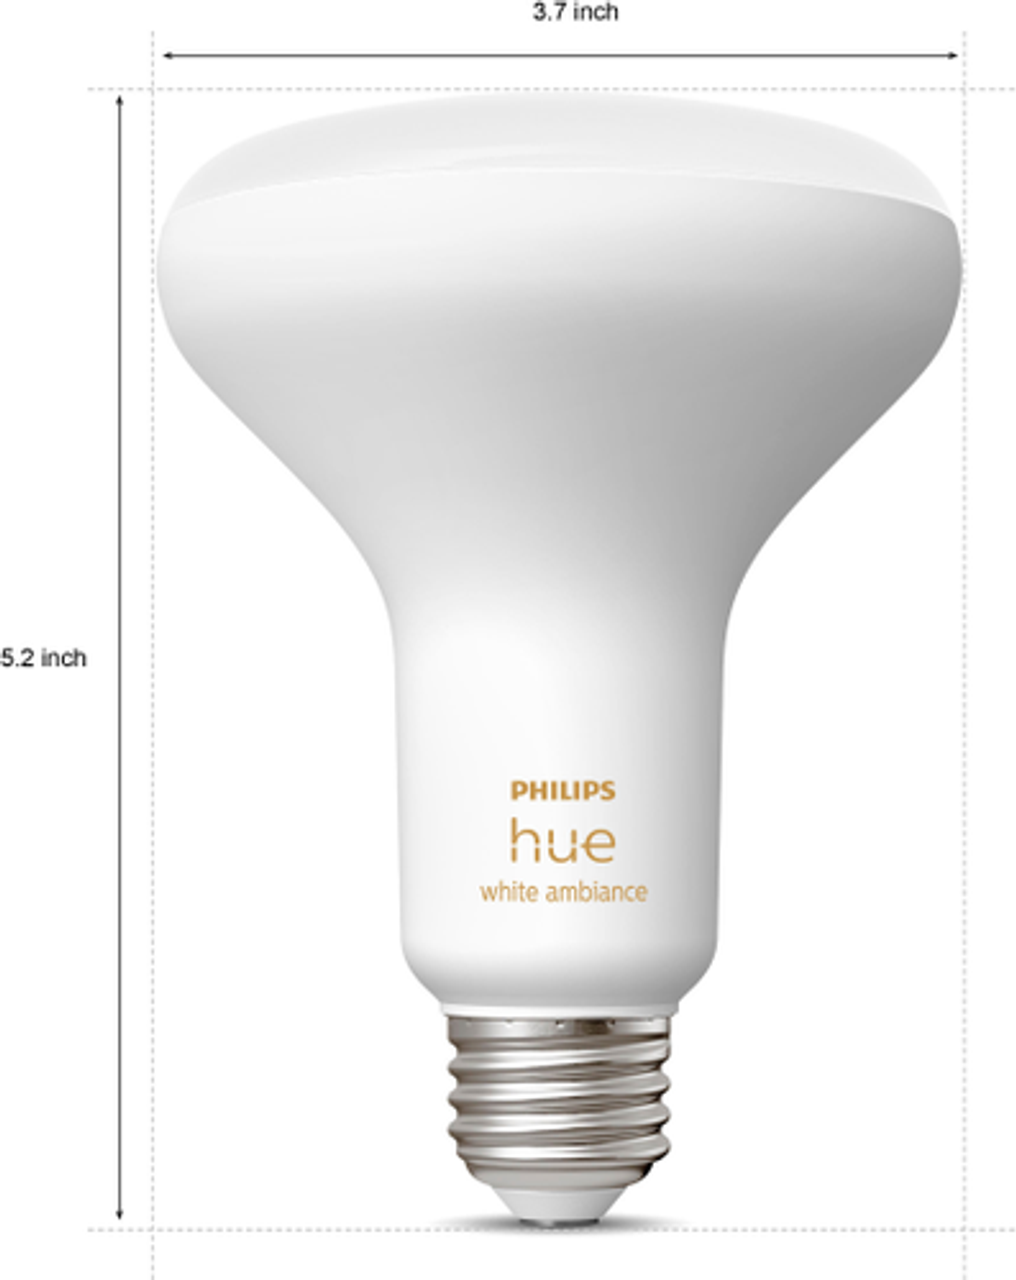 Philips - Hue White Ambiance BR30 Bluetooth 85W Smart LED Bulb (2-pack) - Adjustable White